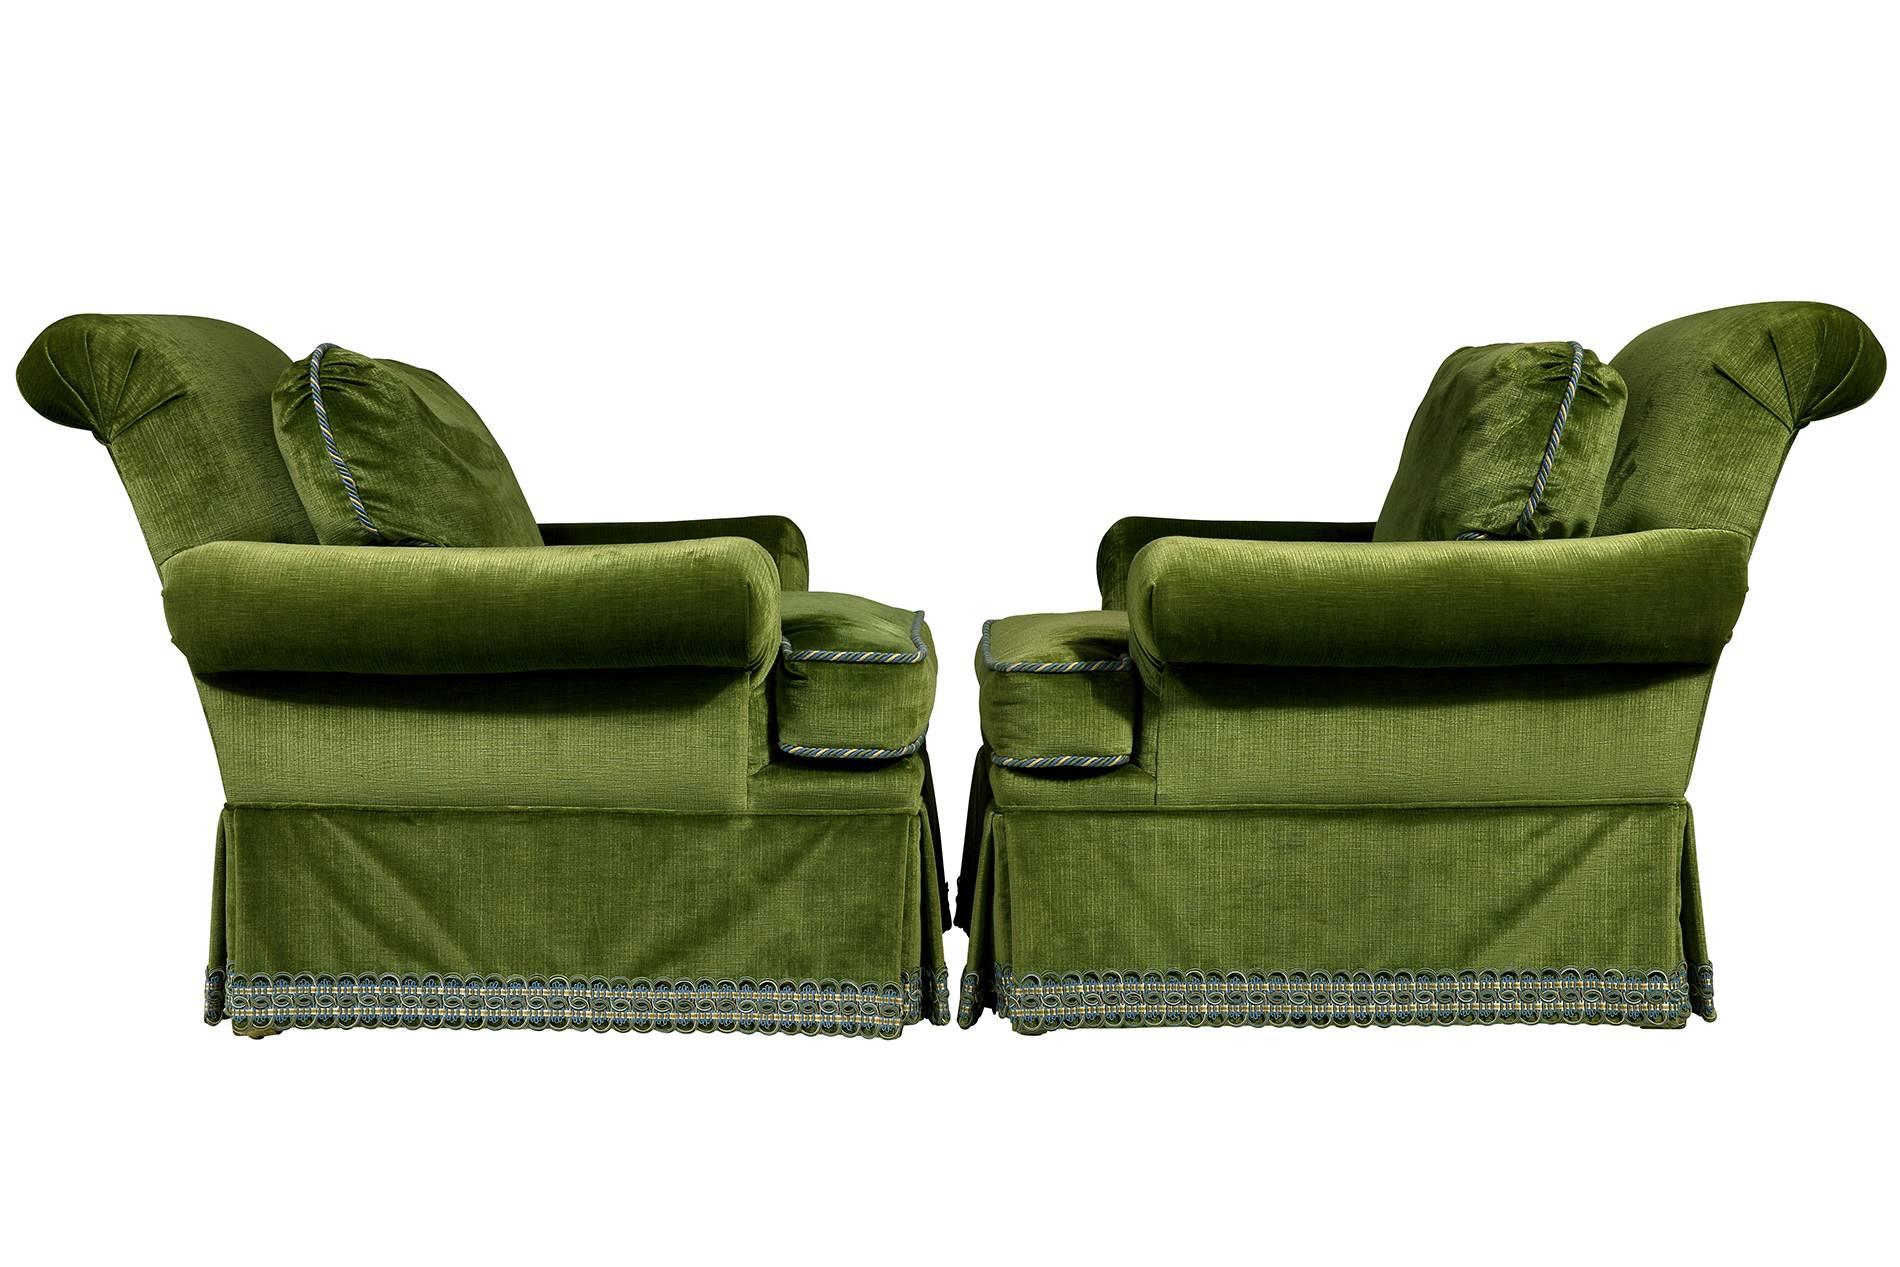 Pair of armchairs upholstered in a rich green Scalamandre velvet with rolled arms and backs. The chairs have skirts and Houles tape and cording with removable cushions.